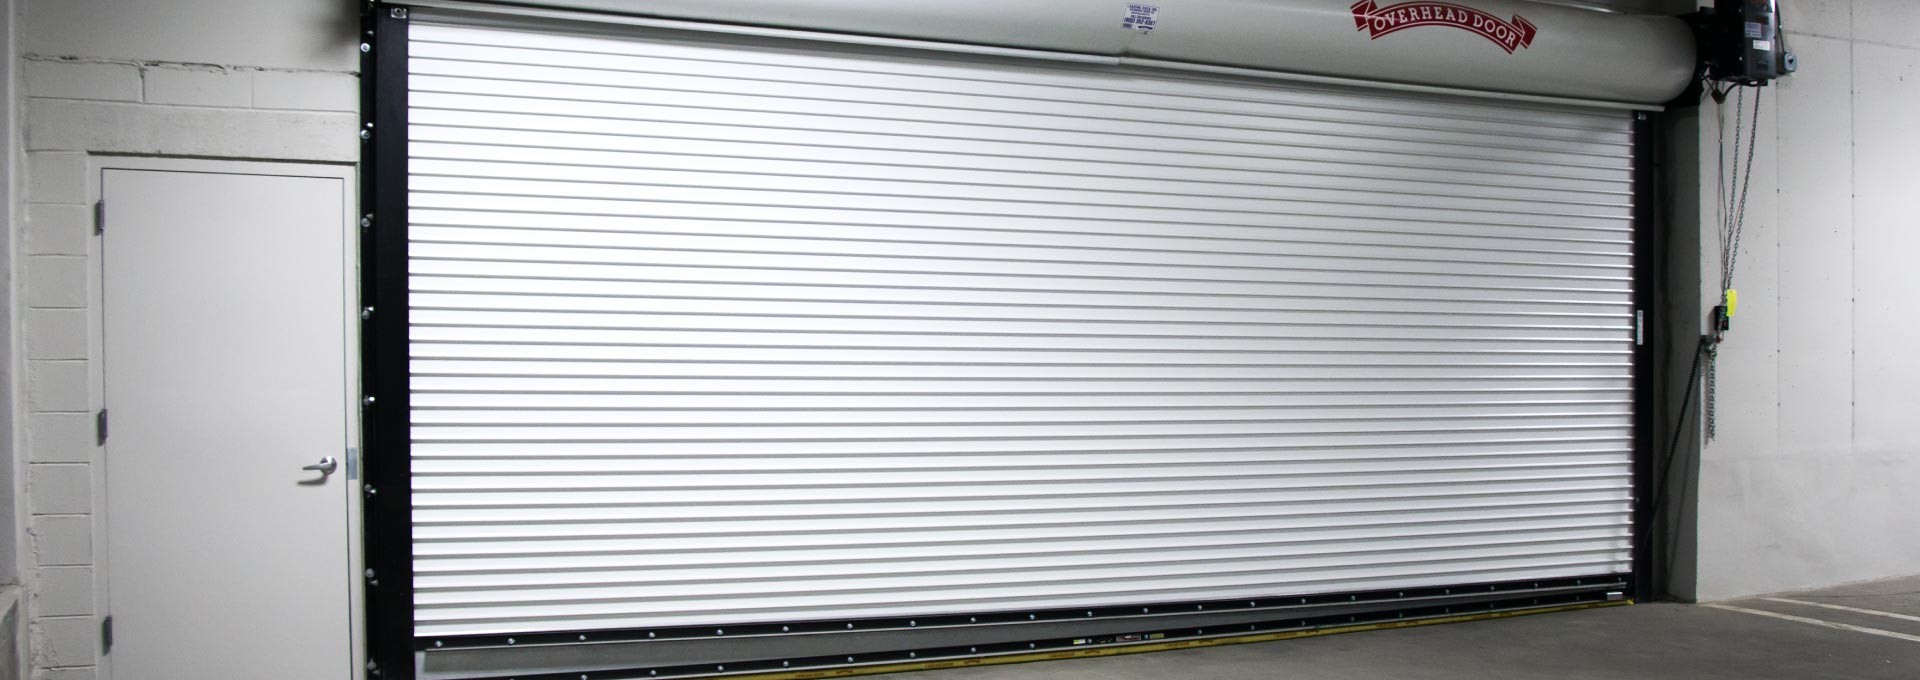 Wide array of rolling steel doors to demanding fire-safety standards and discerning aesthetic requirements